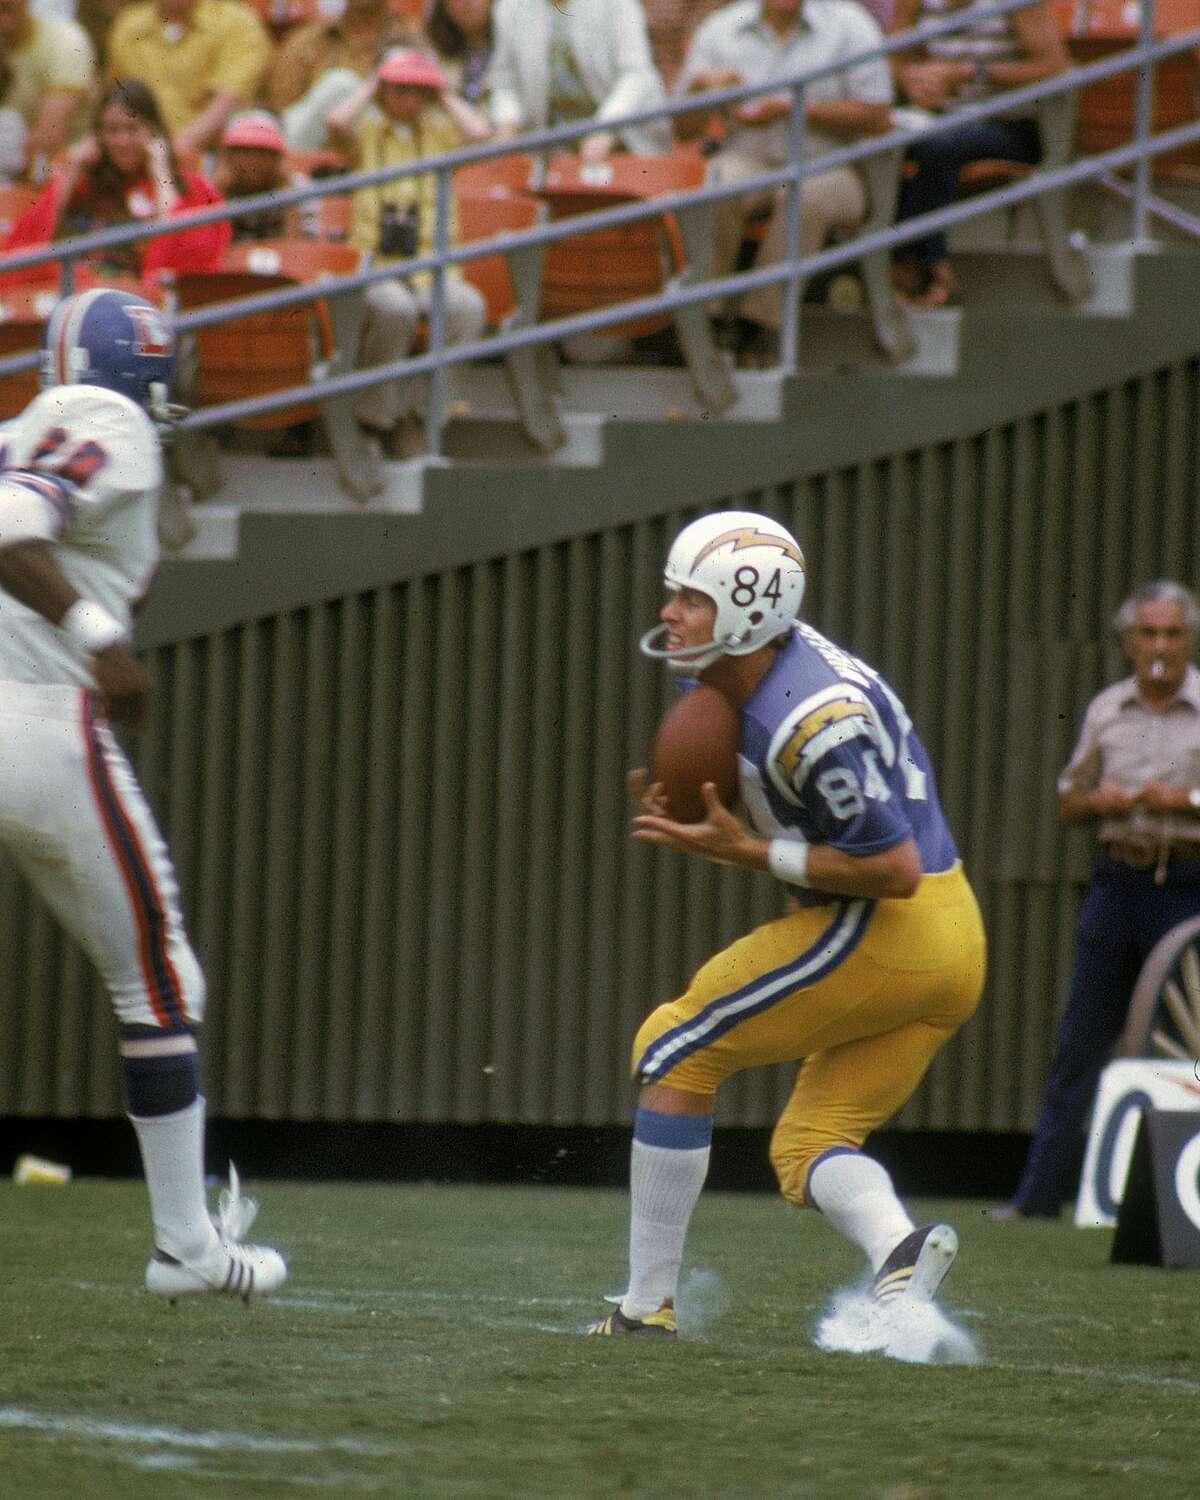 Williams was a wide receiver from 1967 to 1973 in the NFL and played for the San Diego Chargers, now in Los Angeles, Pittsburgh Steelers and St. Louis Cardinals, now in Arizona. He played for the now-defunct World Football League before ending his career with an offseason stint with the Seattle Seahawks.